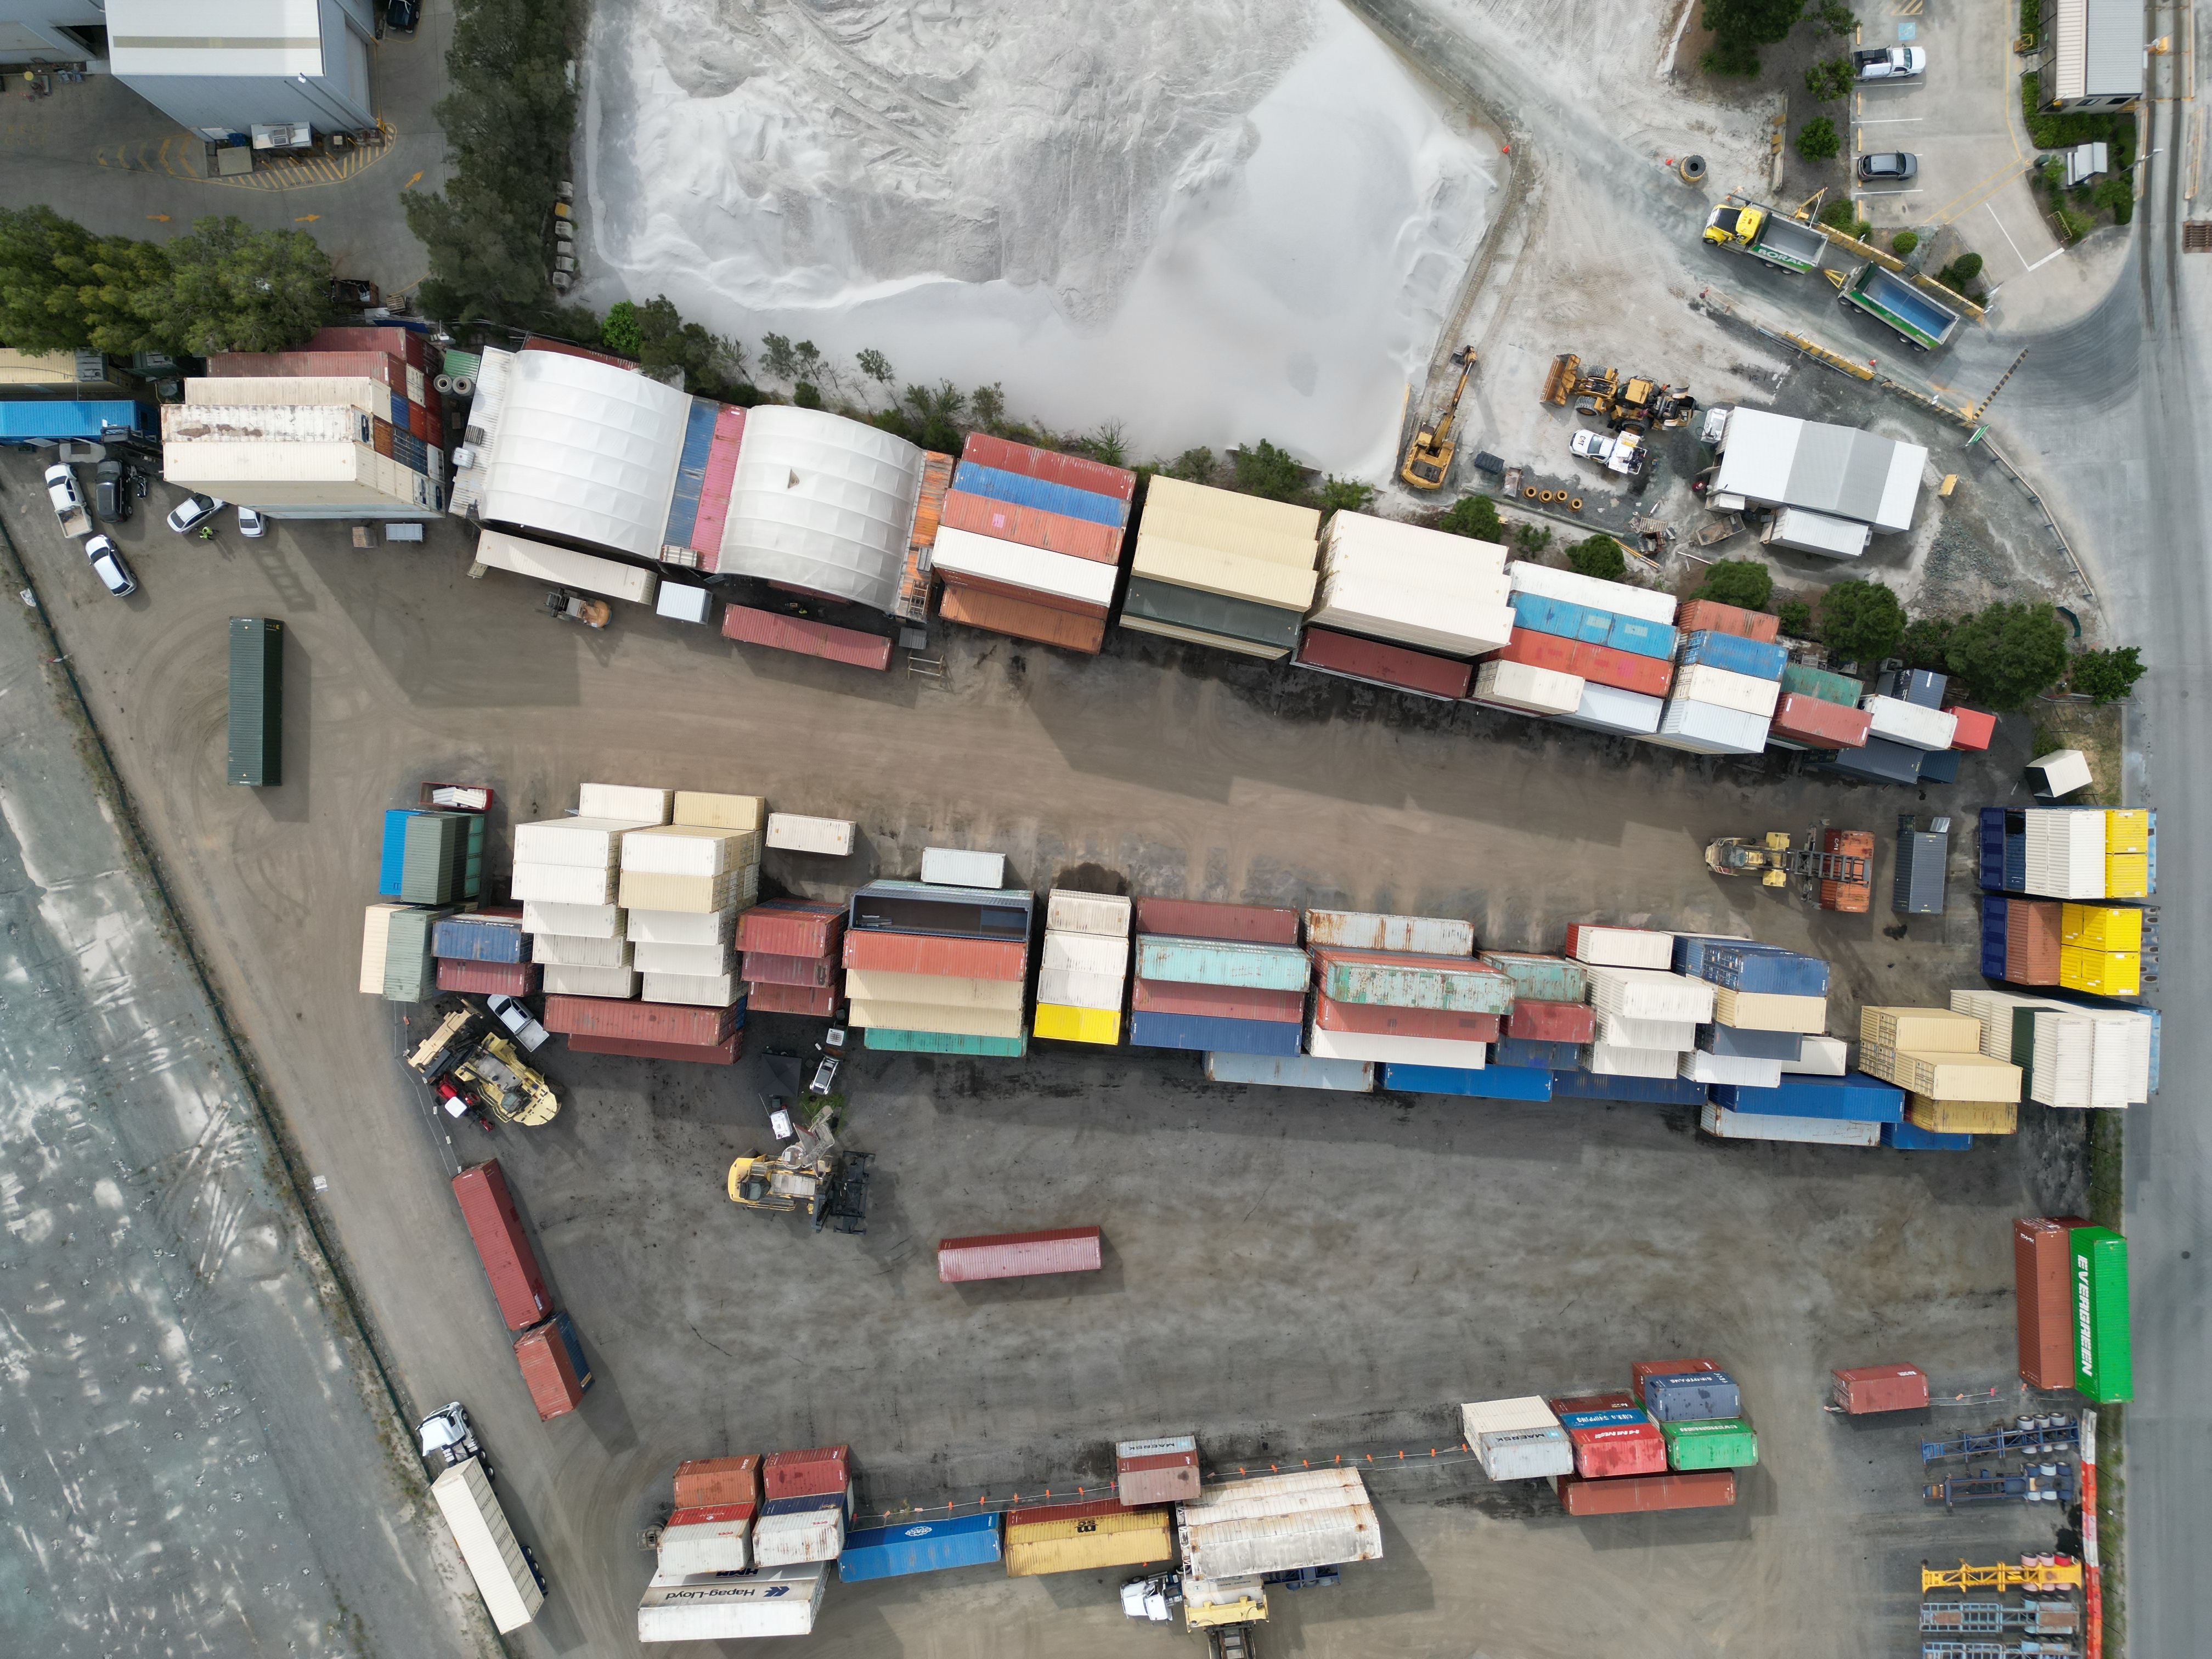 Hemmant shipping container depot from a top down view